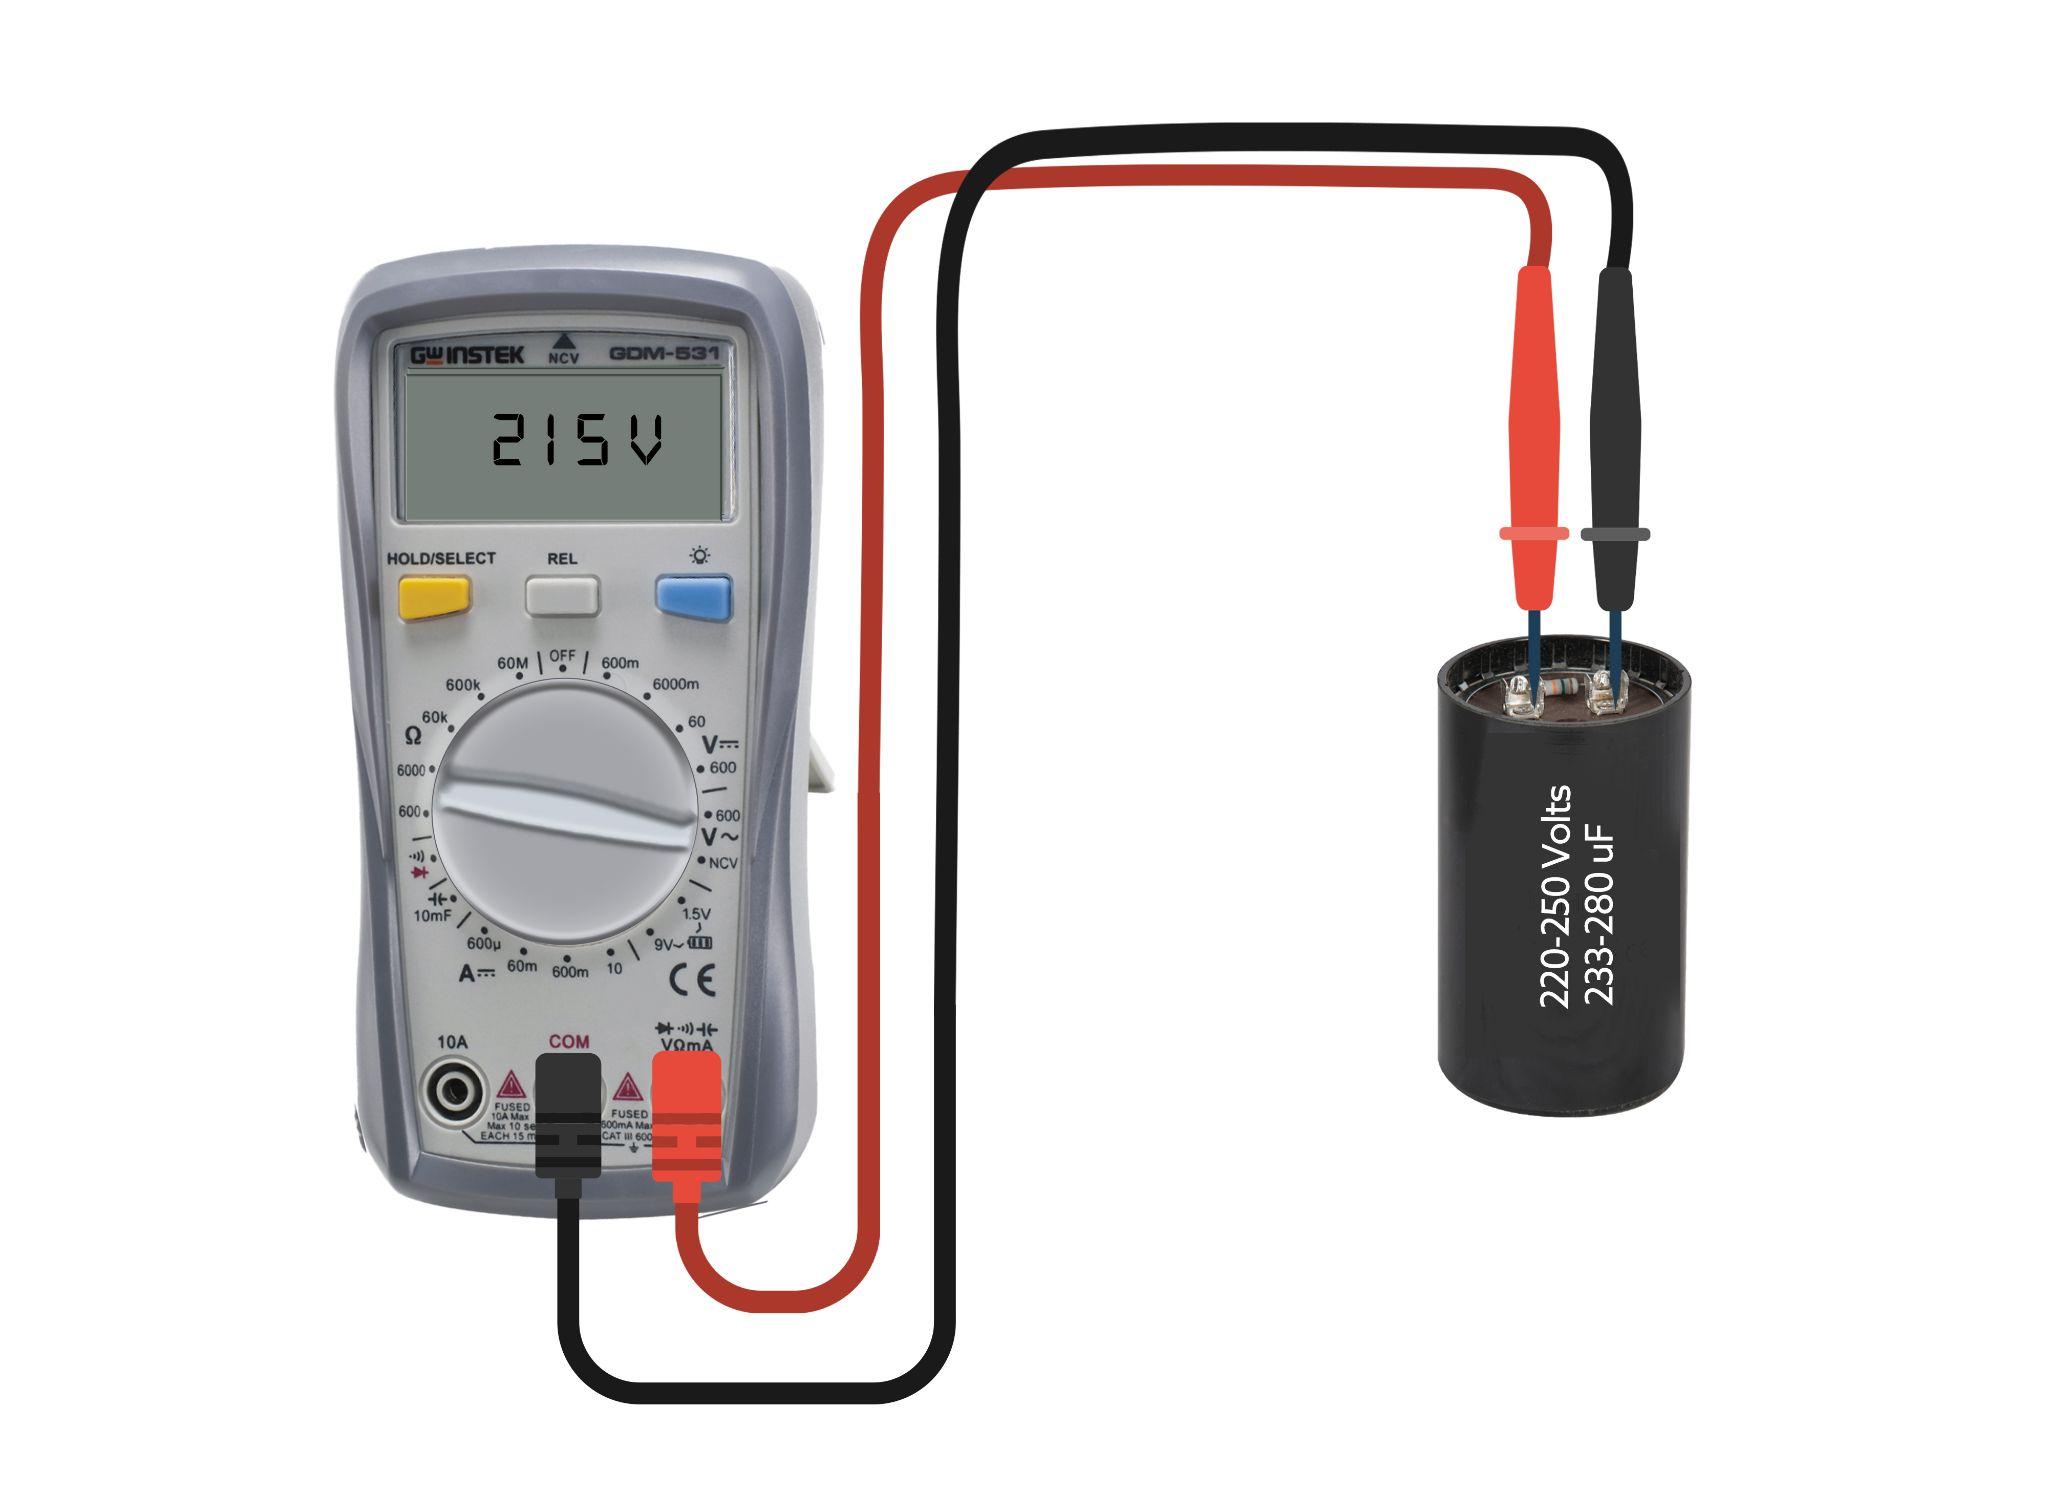 A digital multimeter connected to wires generates details automatically